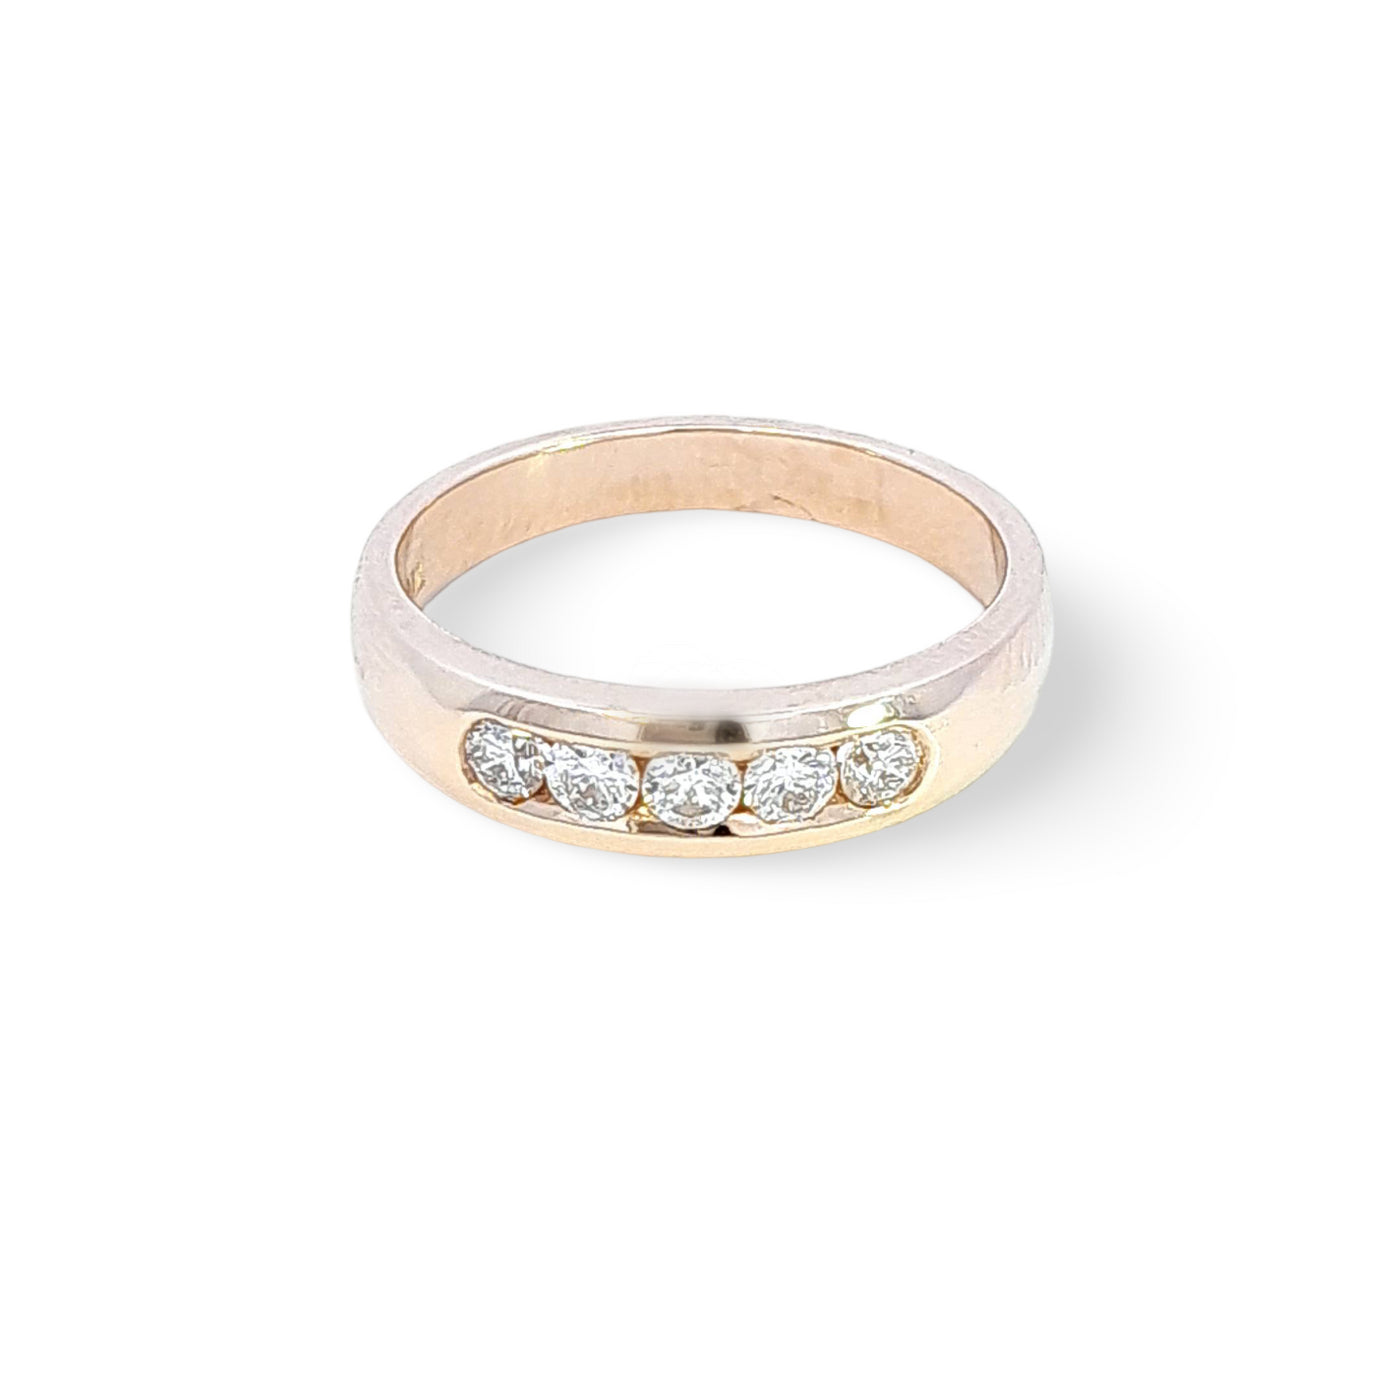 9ct Yellow Gold Diamond Channel Ring